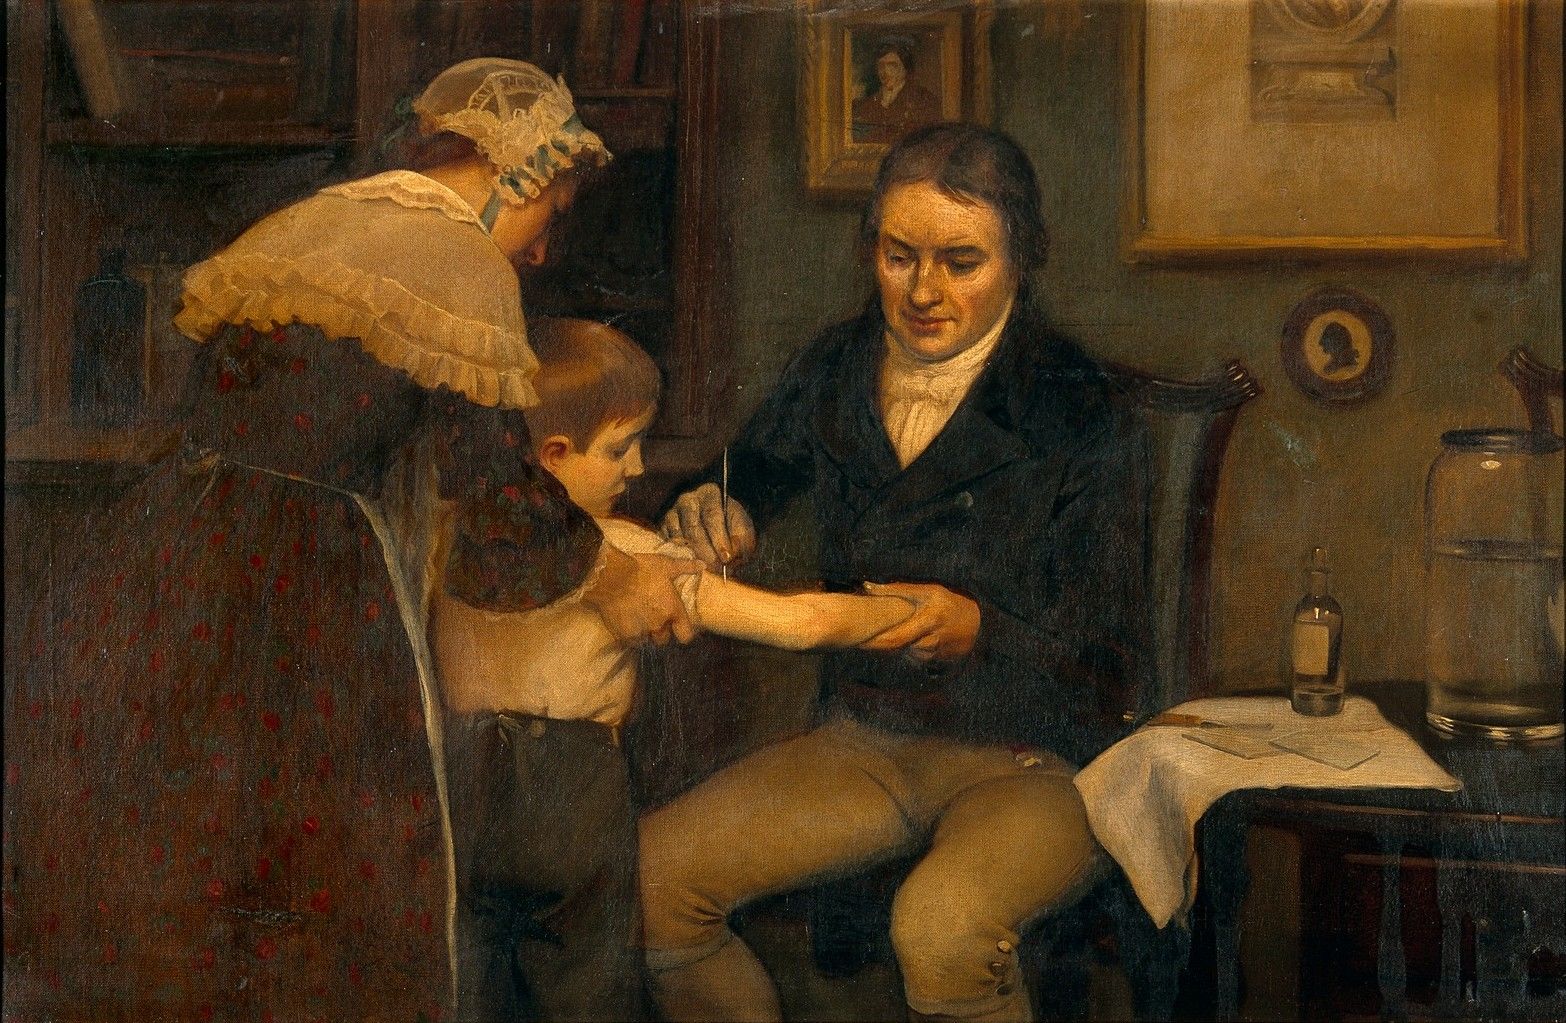 Edward Jenner performing the first vaccination.